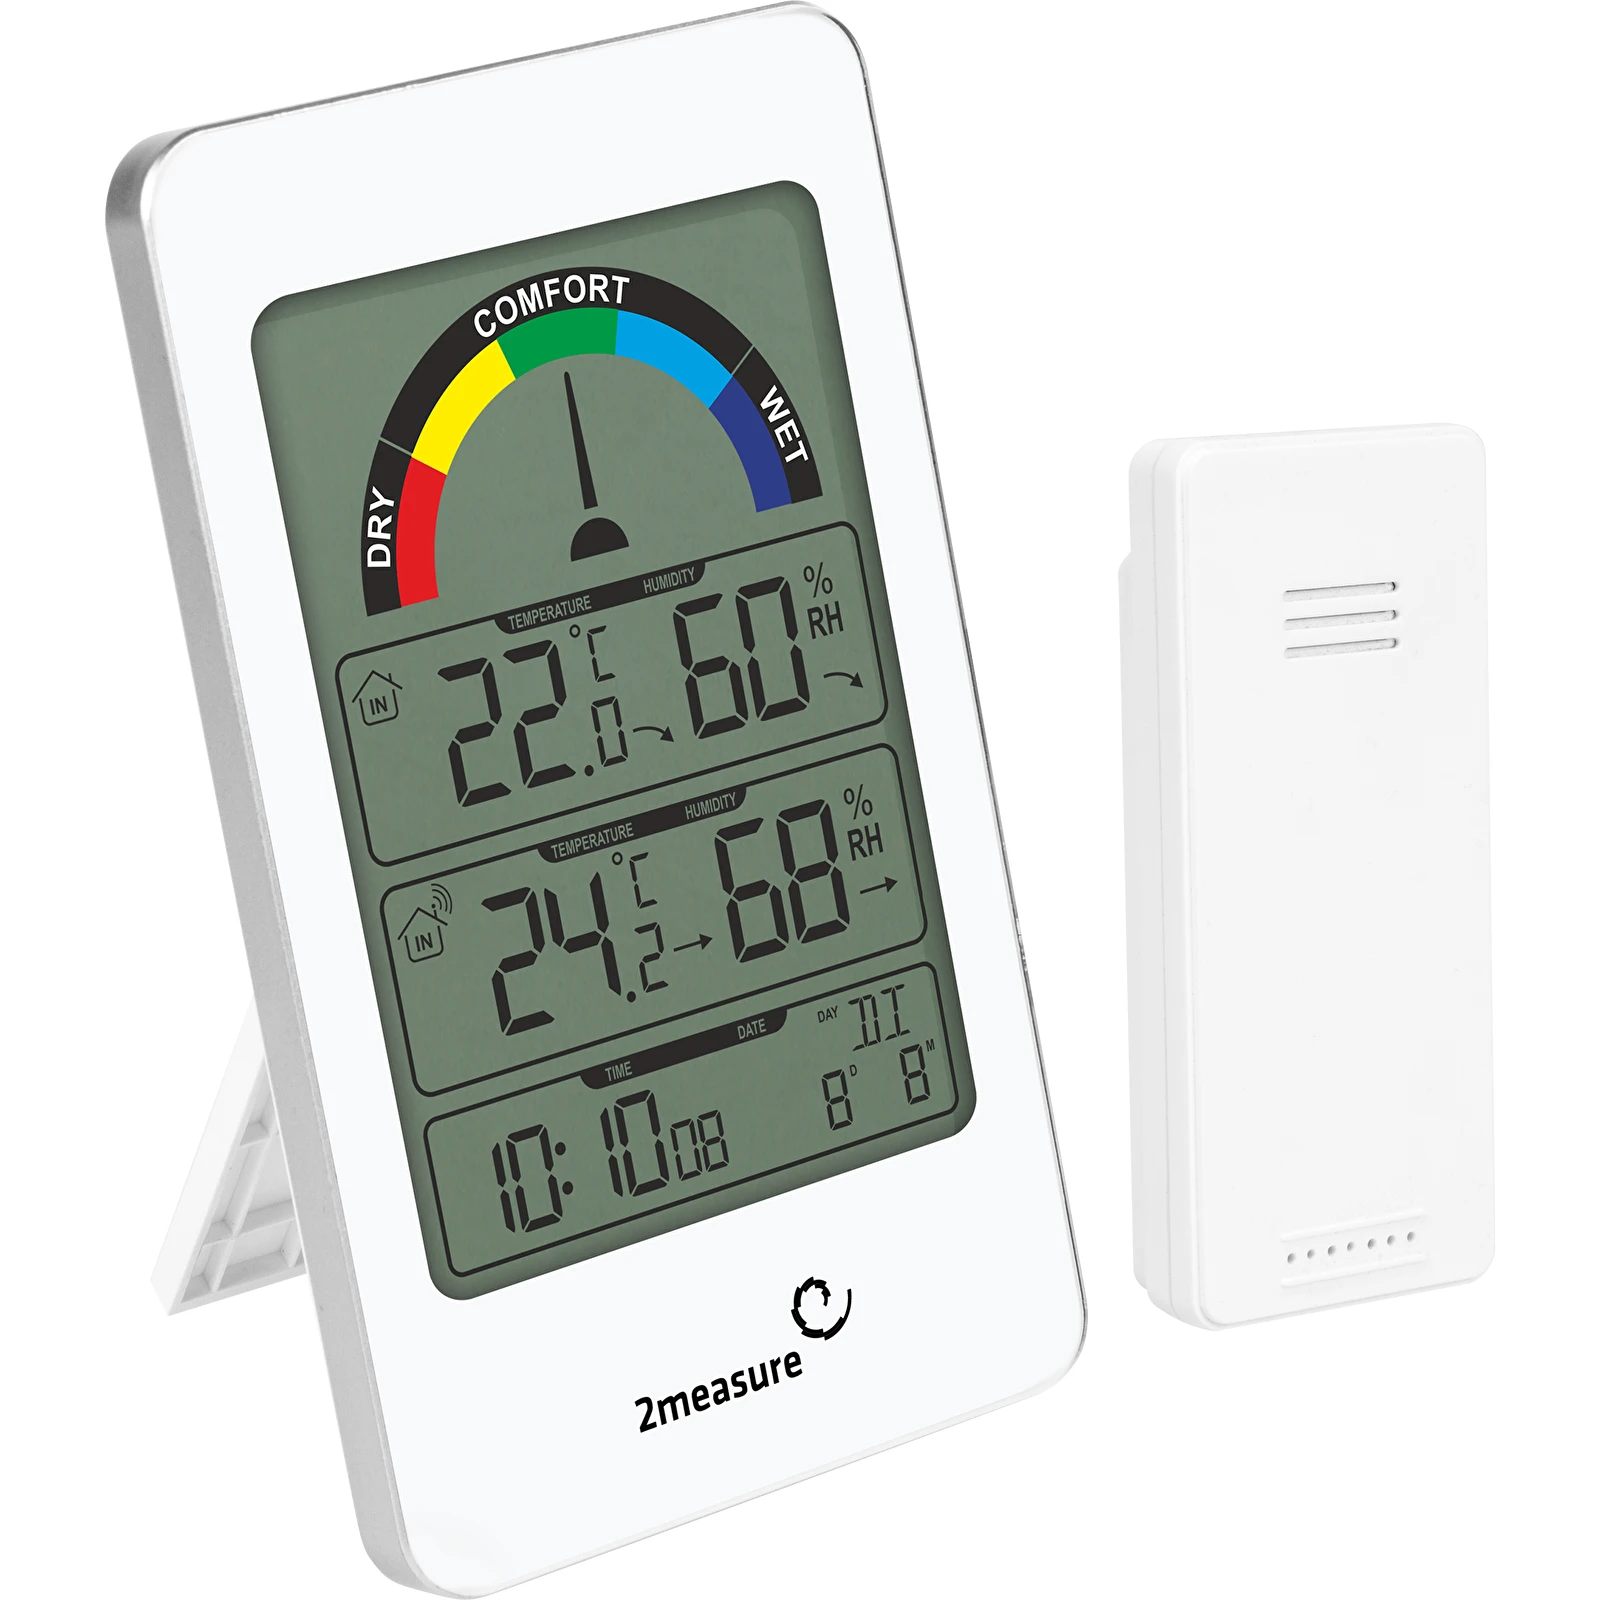 https://browin.com/static/images/1600/weather-station-electronic-rcc-sensor-thermometer-and-hygrometer-250202.webp